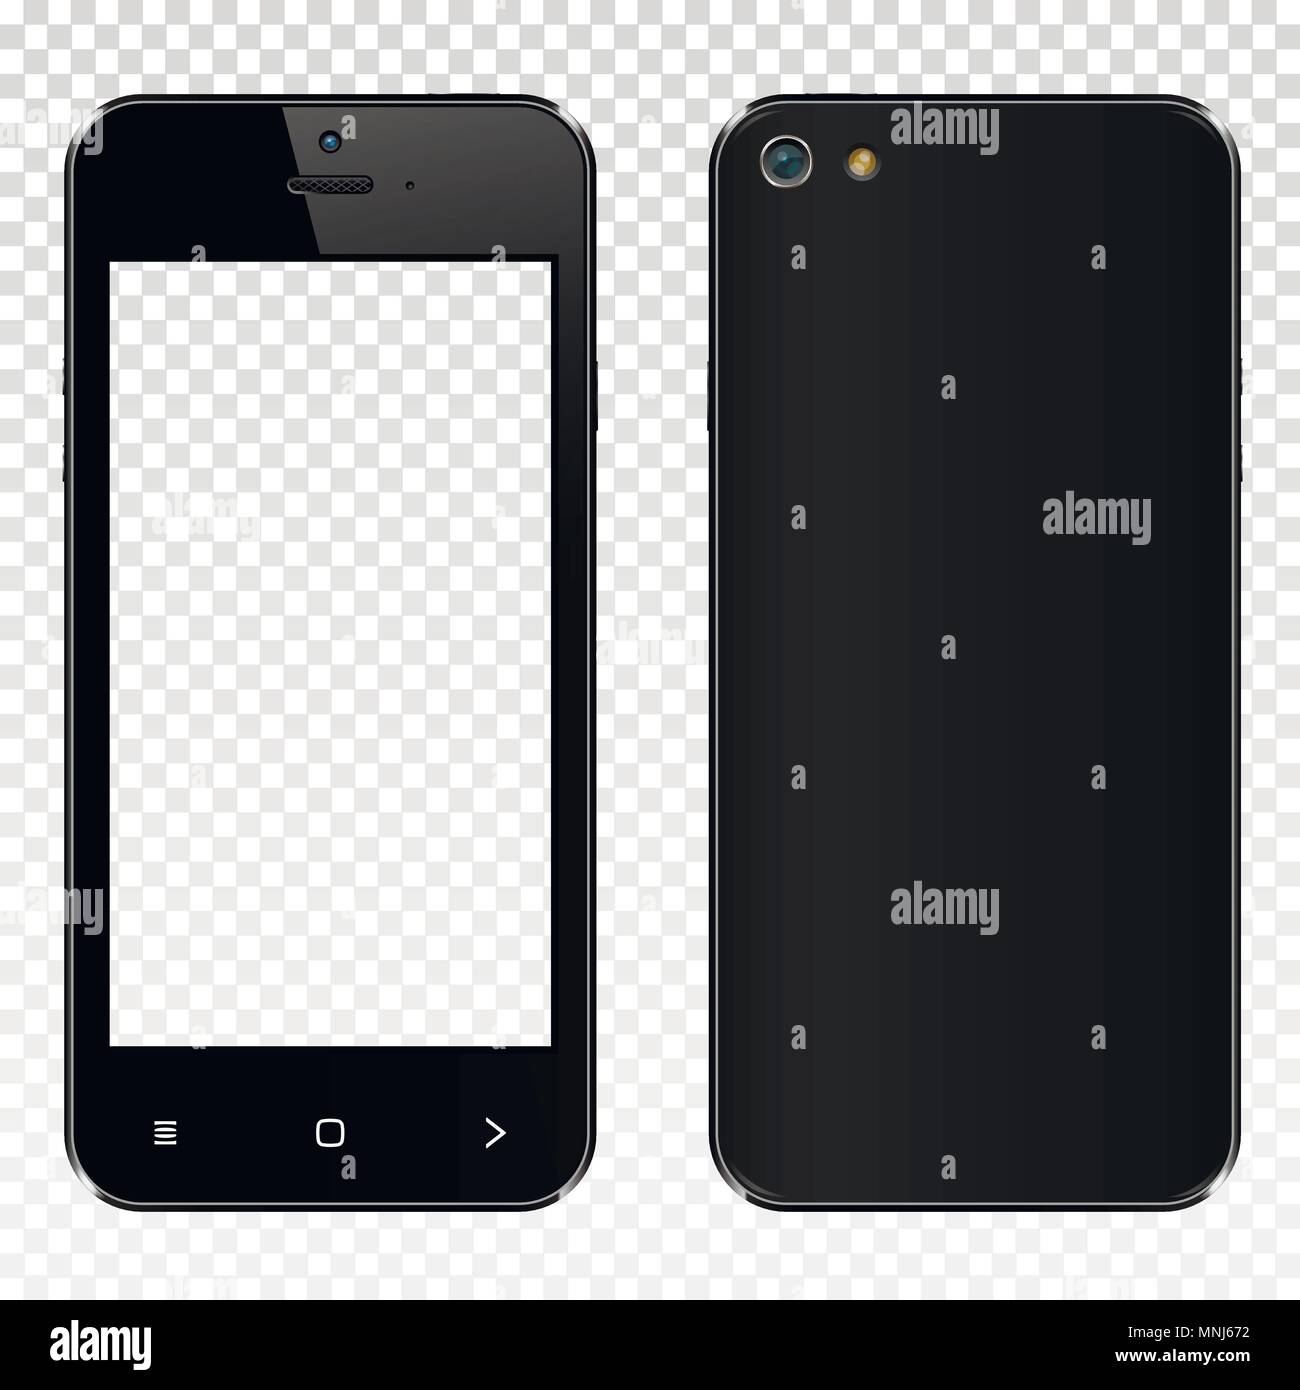 Realistic black smartphone with transparent screen isolated on transparent background. Front and back display view. Vector illustration. Stock Vector